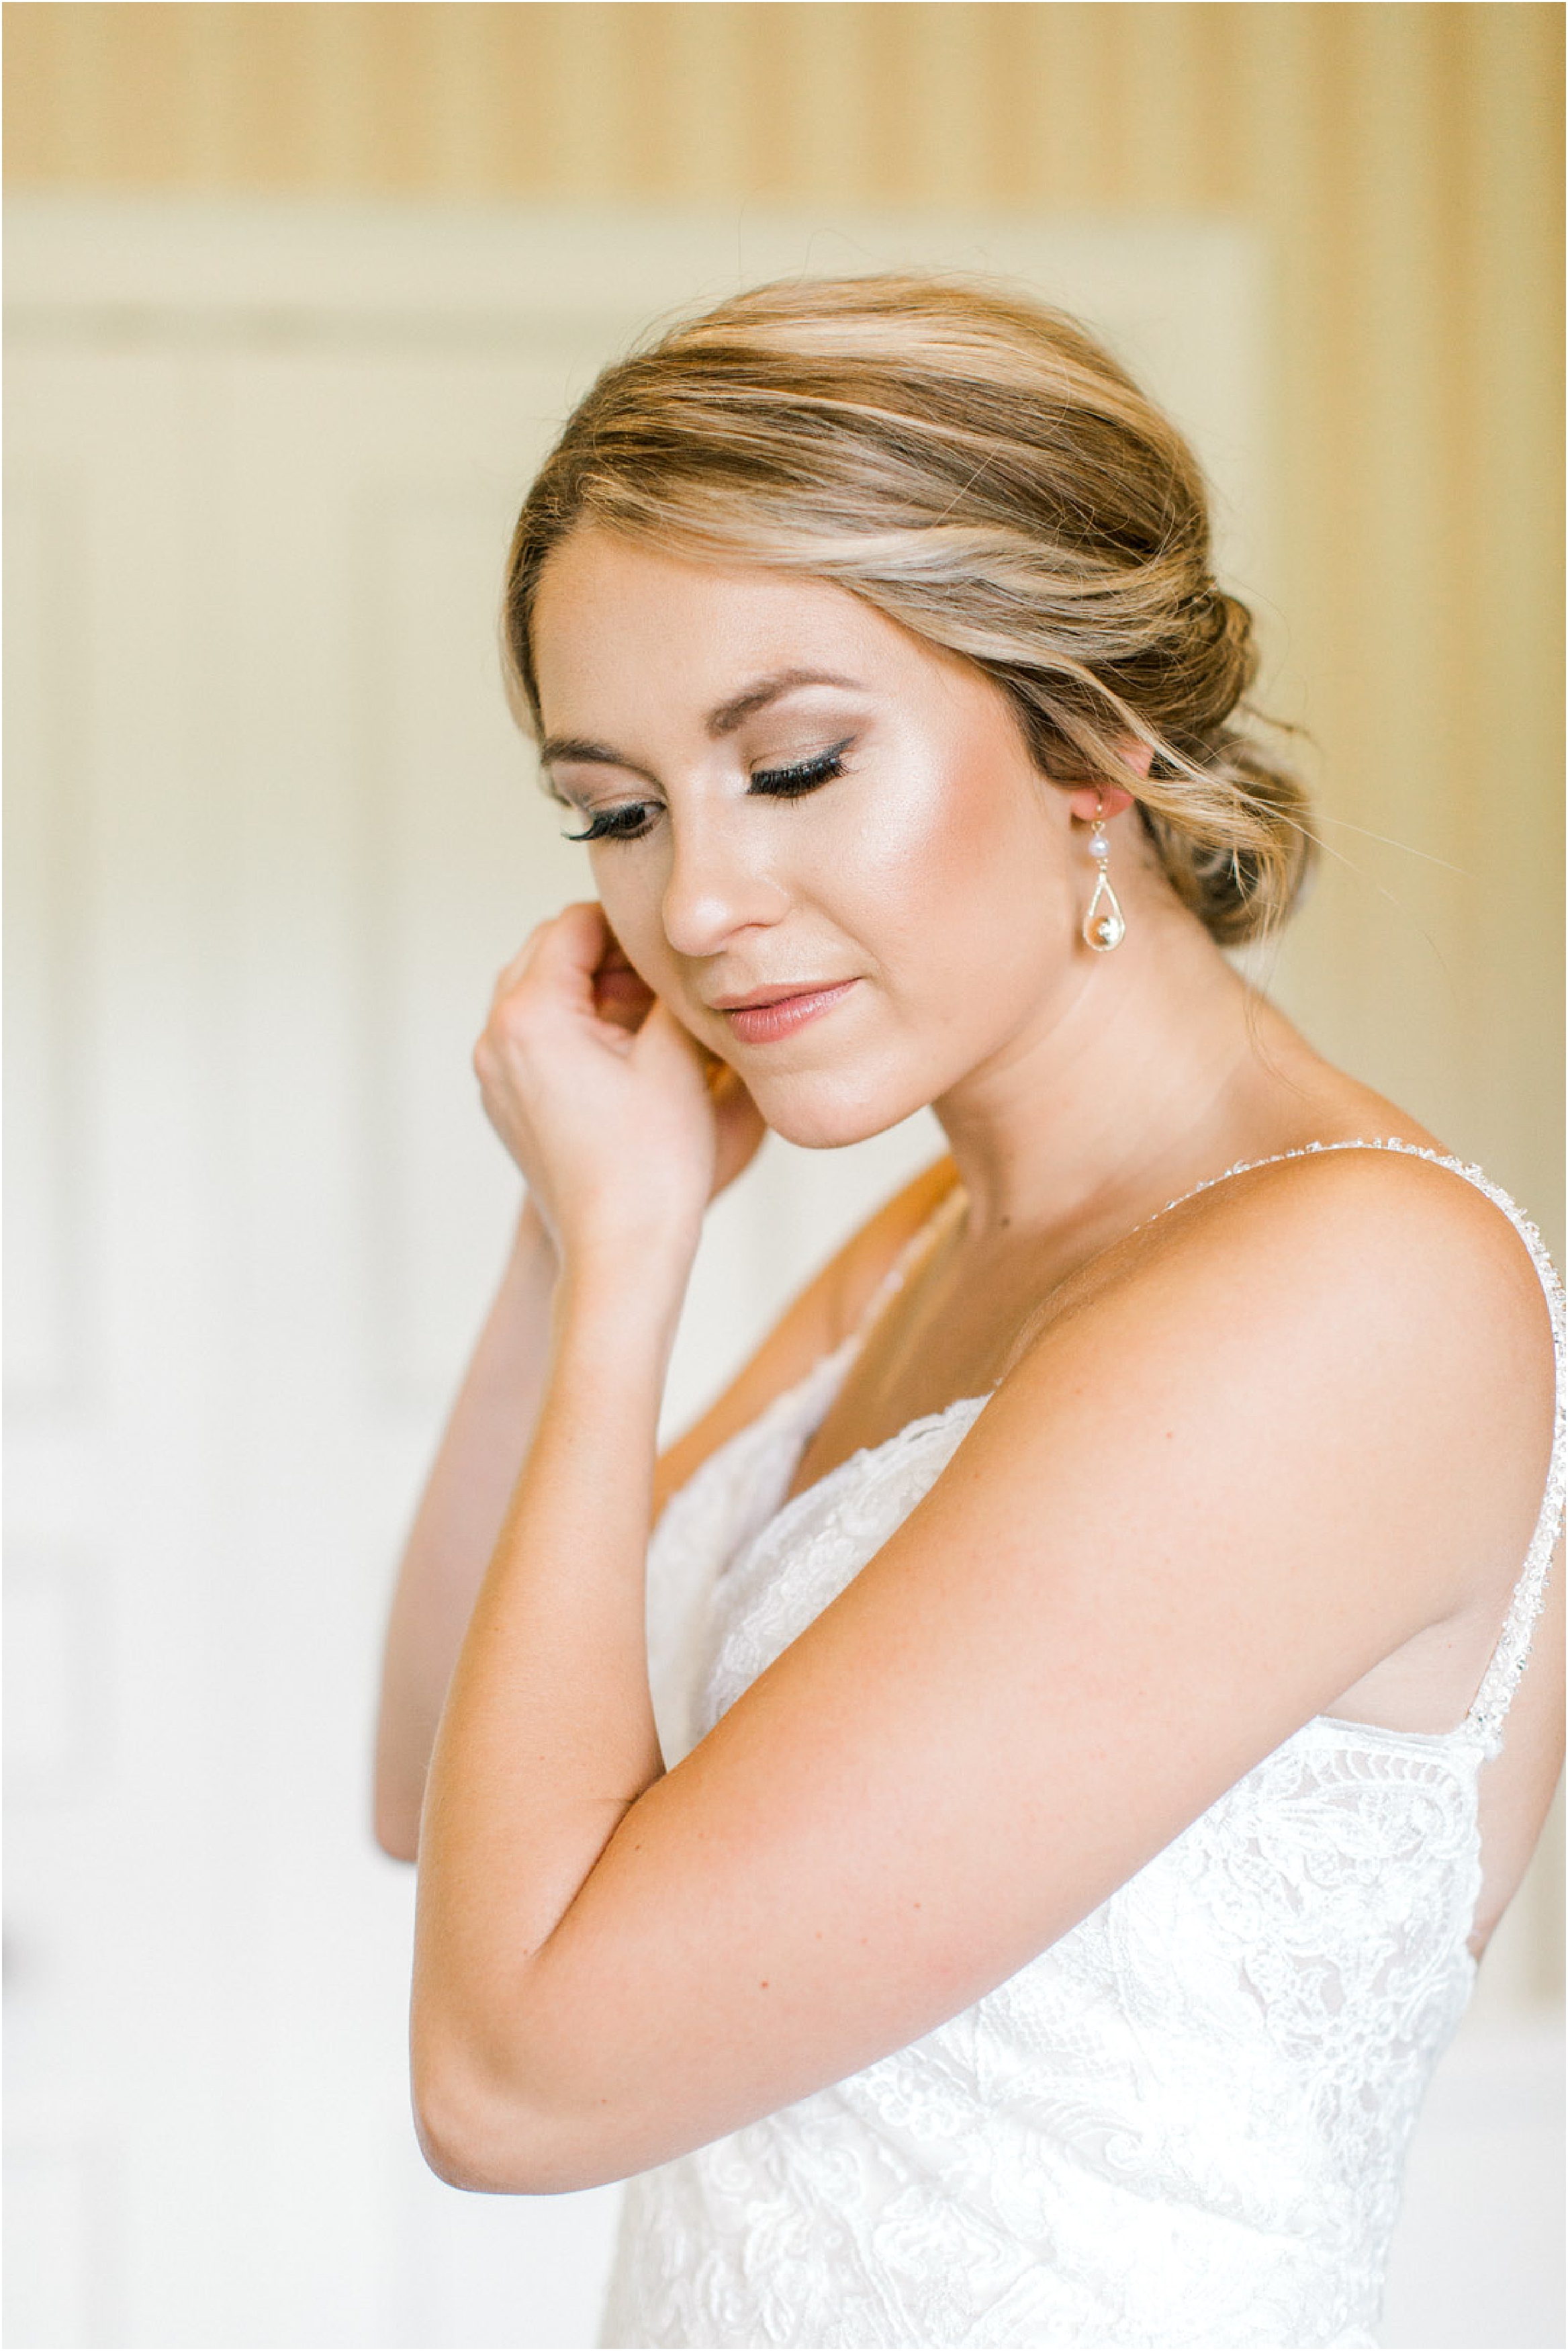 Bride putting on earrings while wearing Morilee lace gown